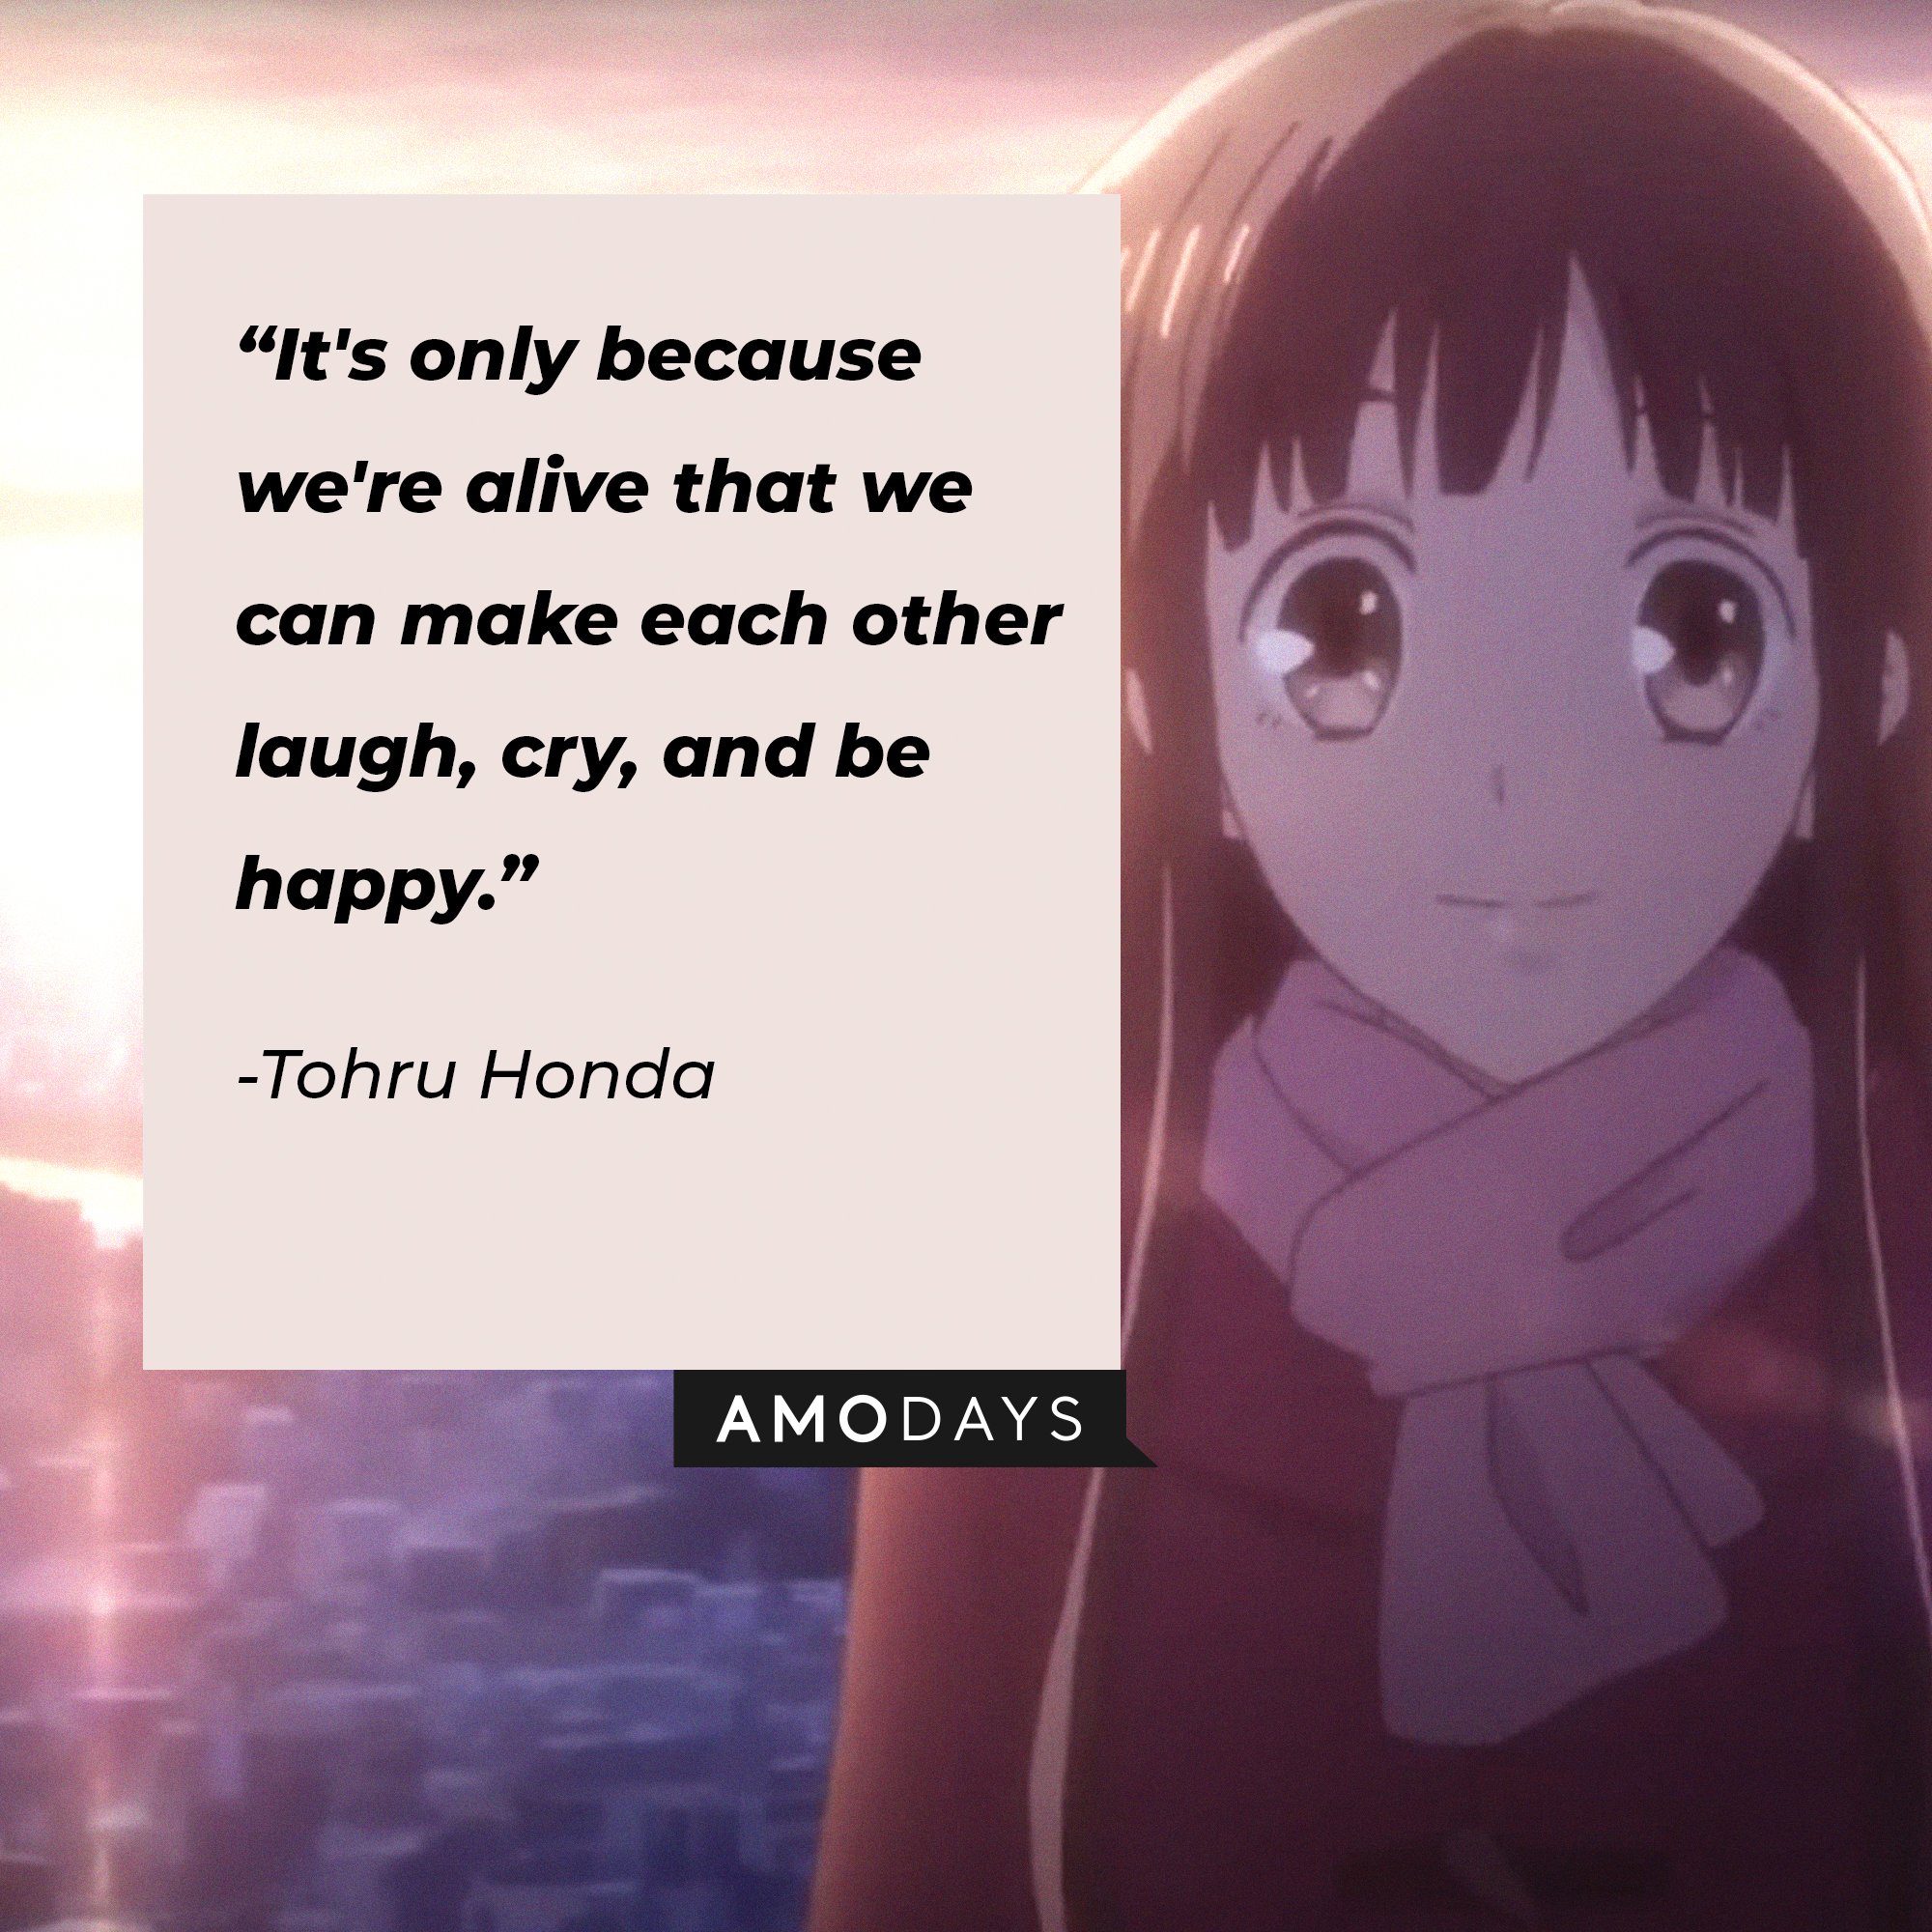 Tohru Honda’s quote: “It's only because we're alive that we can make each other laugh, cry, and be happy." | Image: AmoDays